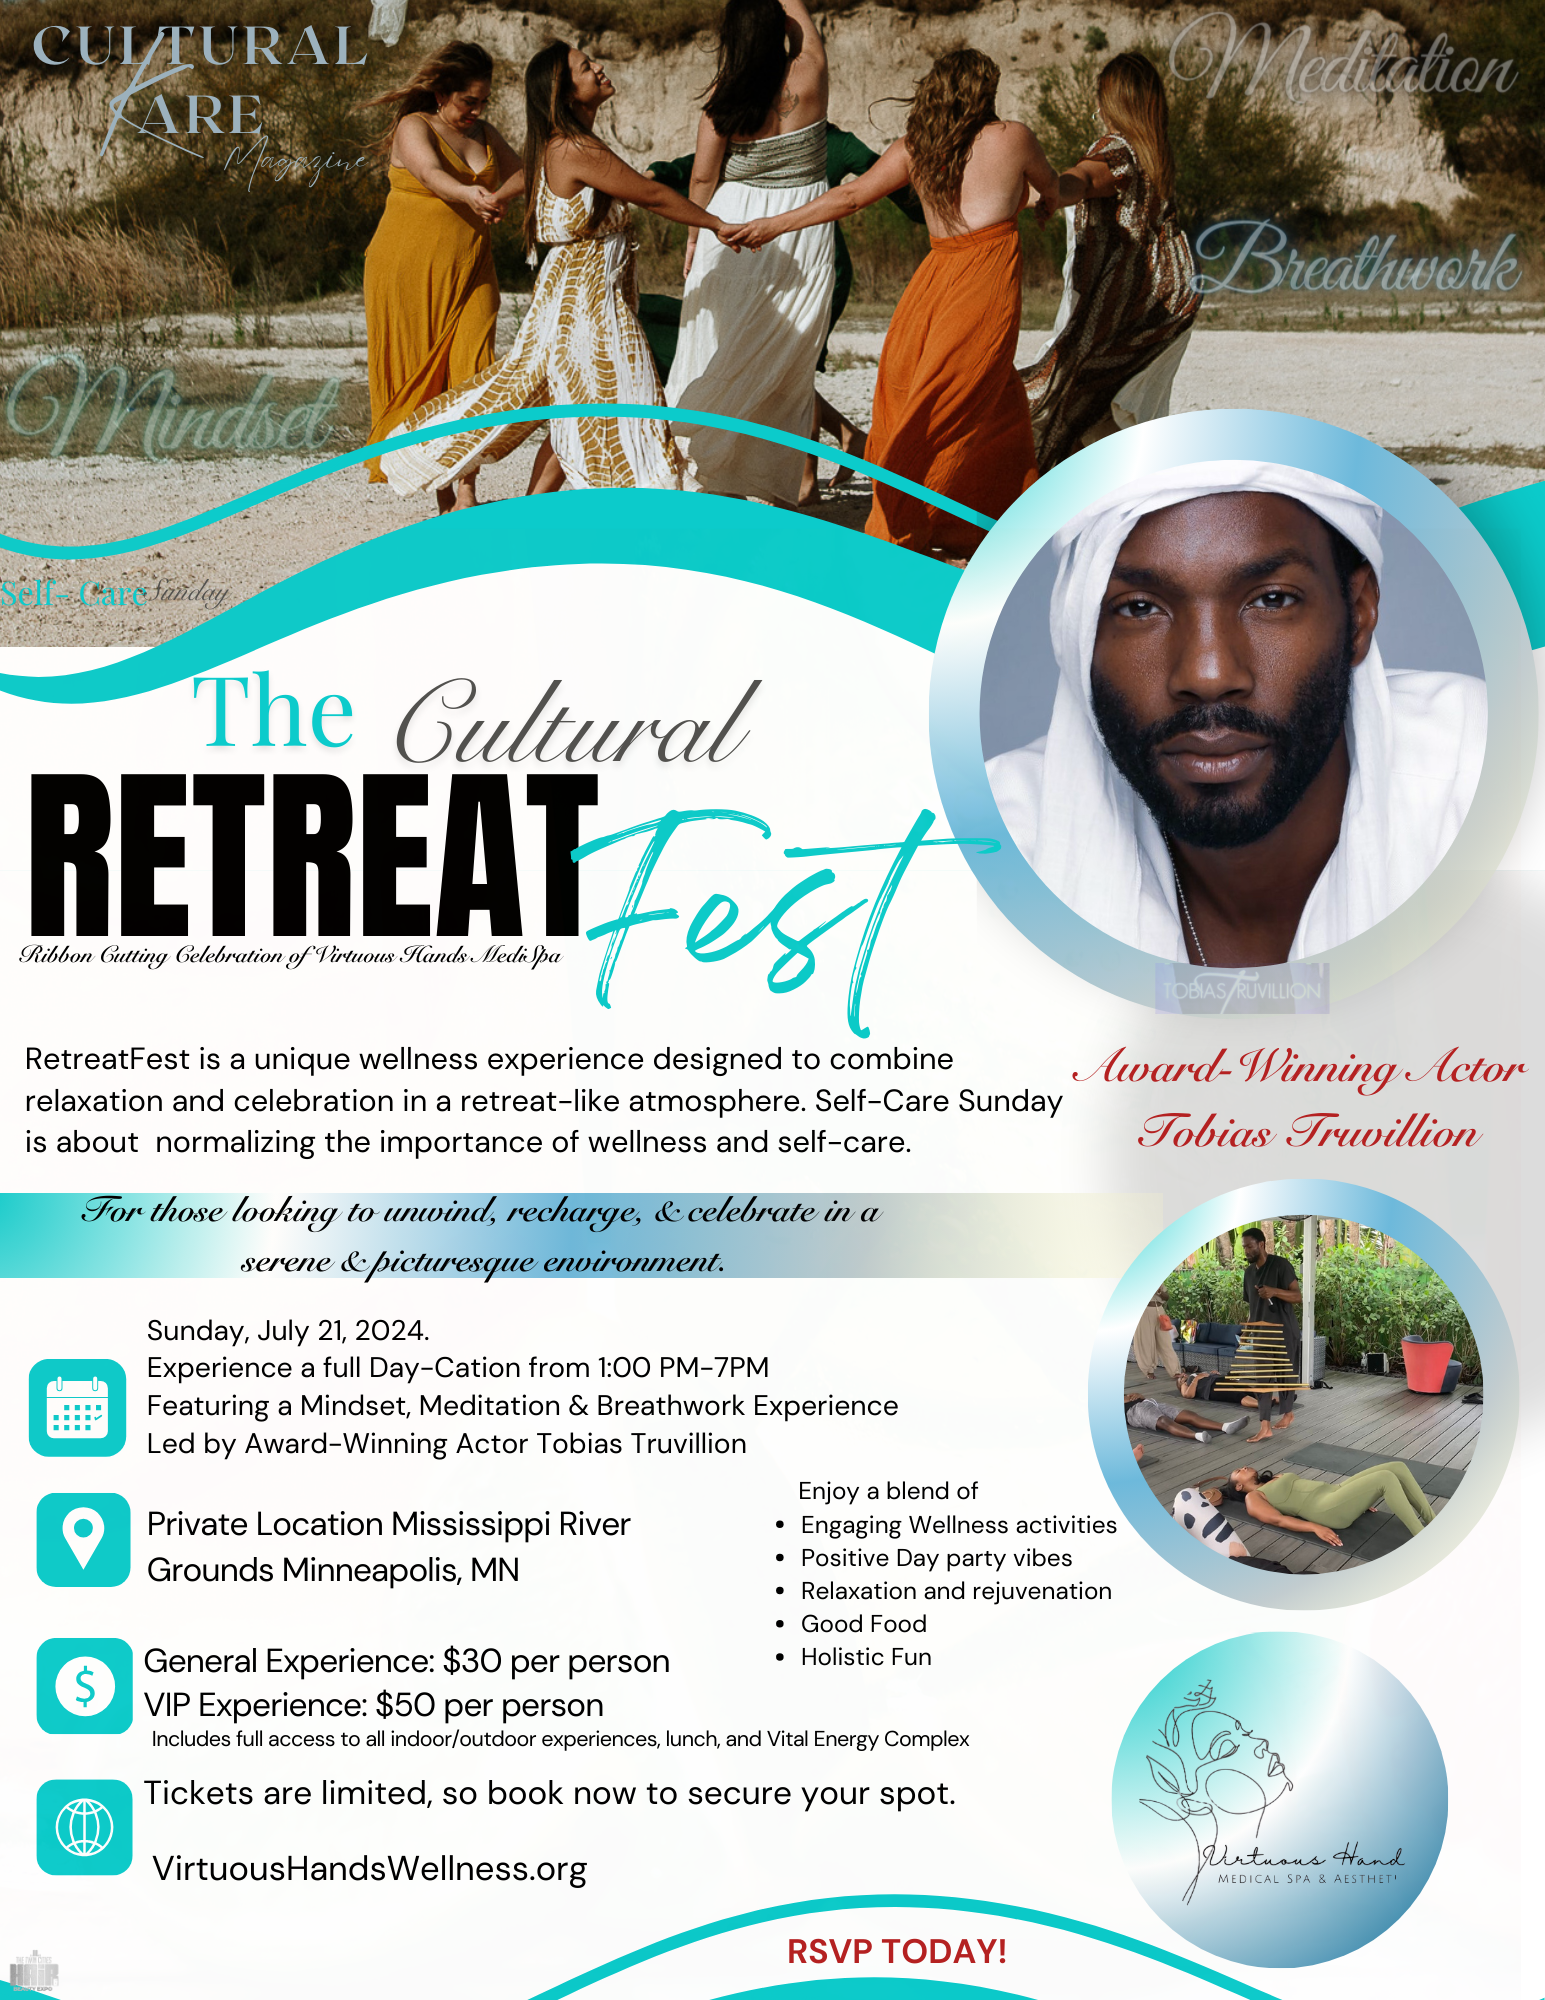 Virtuous Hands Medi Spa Celebrates Official Ribbon-Cutting Ceremony with Cultural RetreatFest